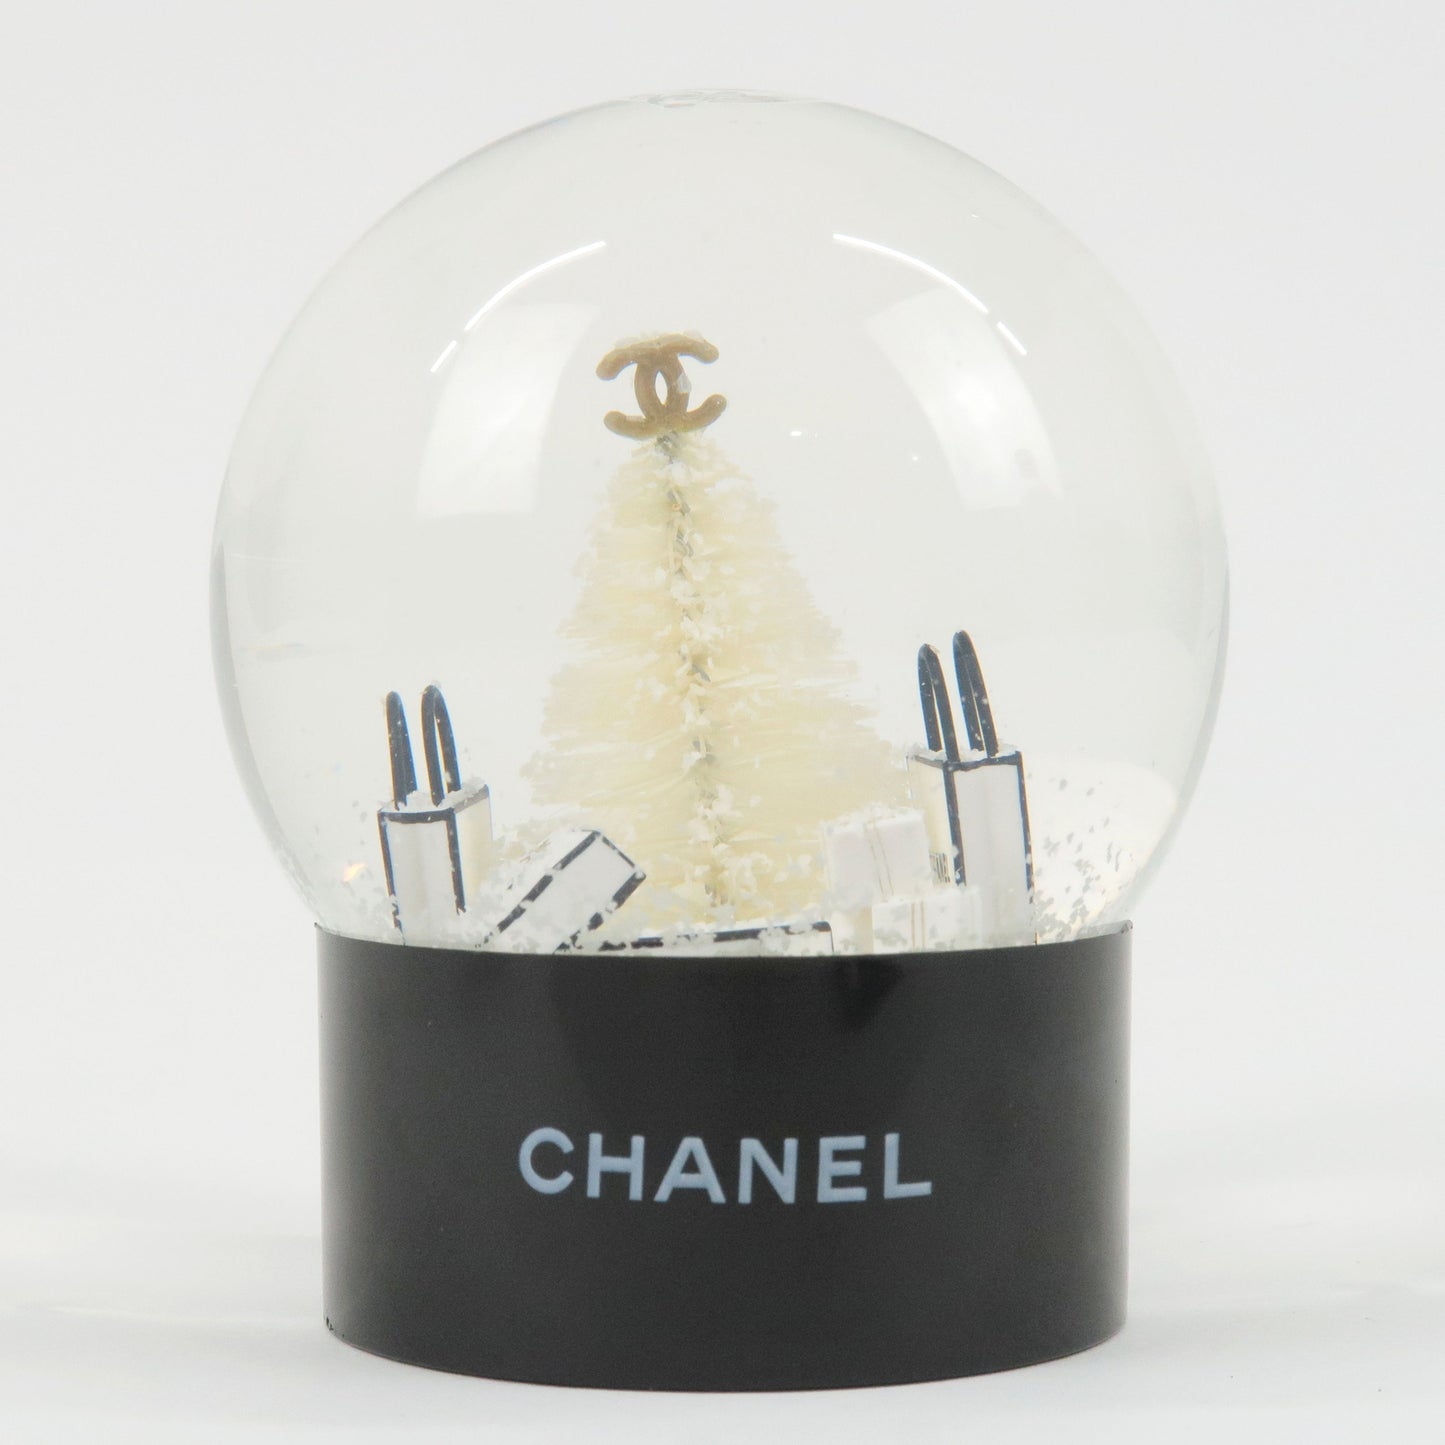 CHANEL Snow Globe 2012 Novelty Brand Accessory Collection